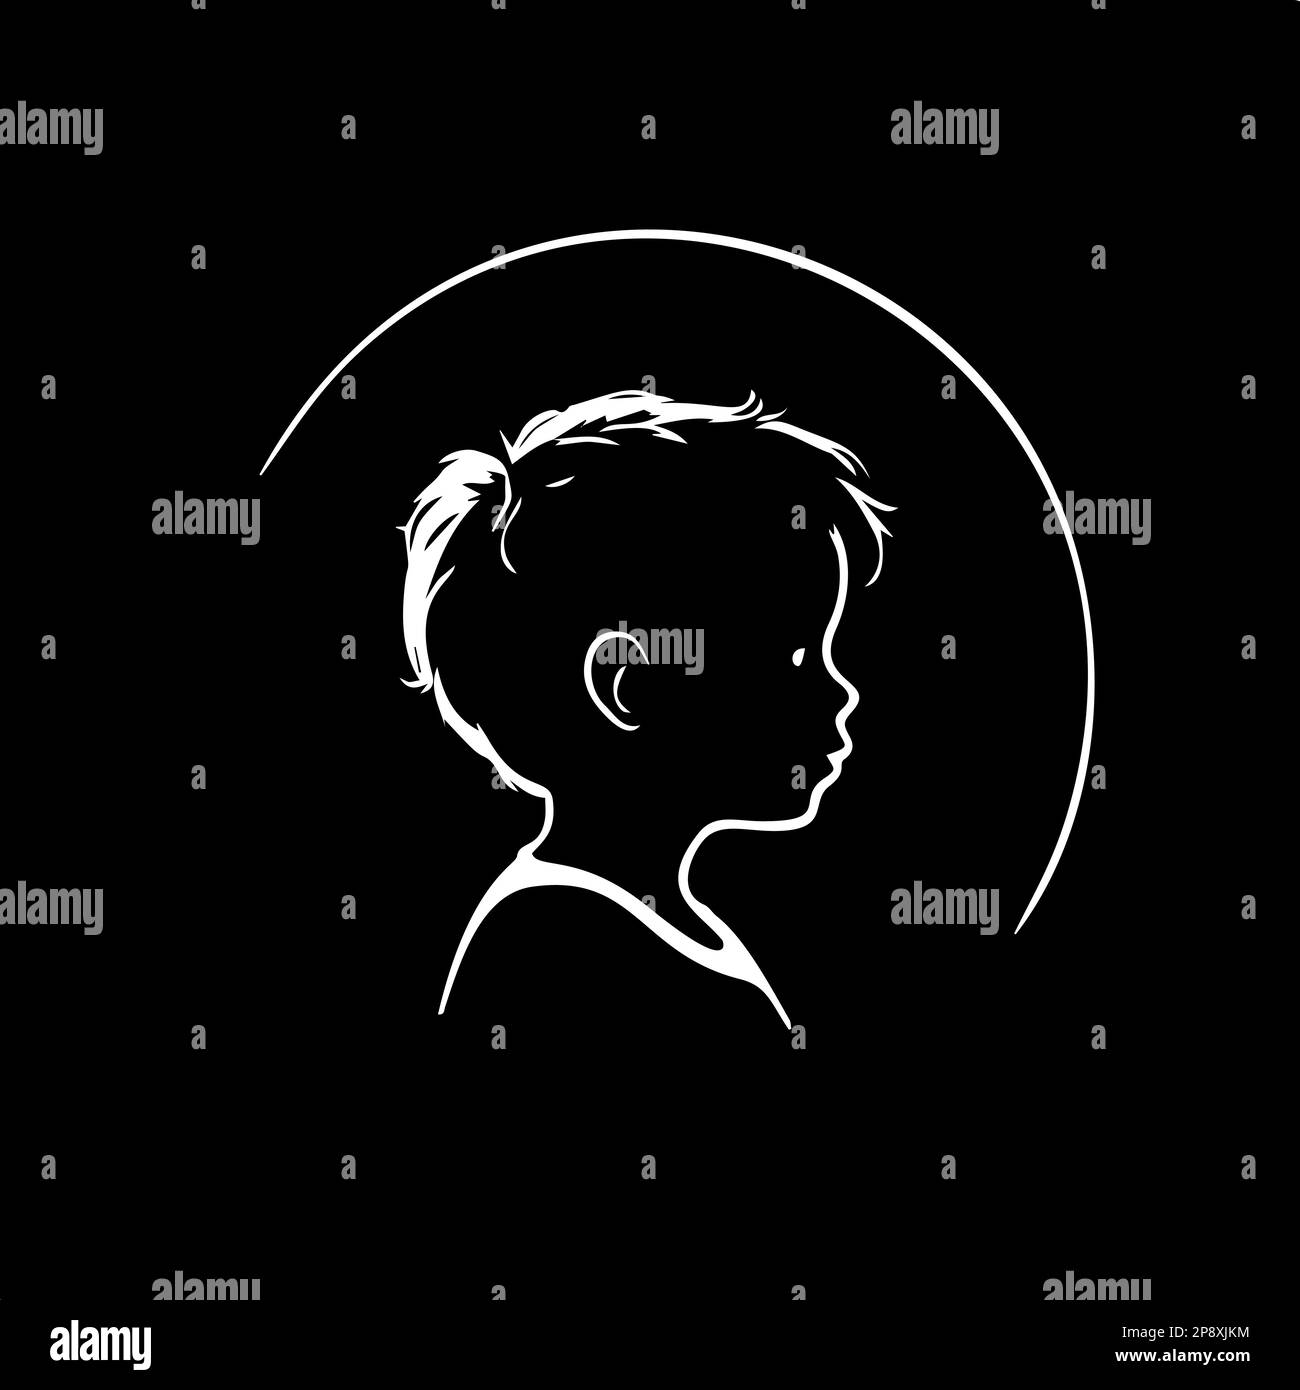 Minimalistic logo template, white icon of boy silhouette on black background, modern logotype concept for business identity, t-shirts print Stock Vector